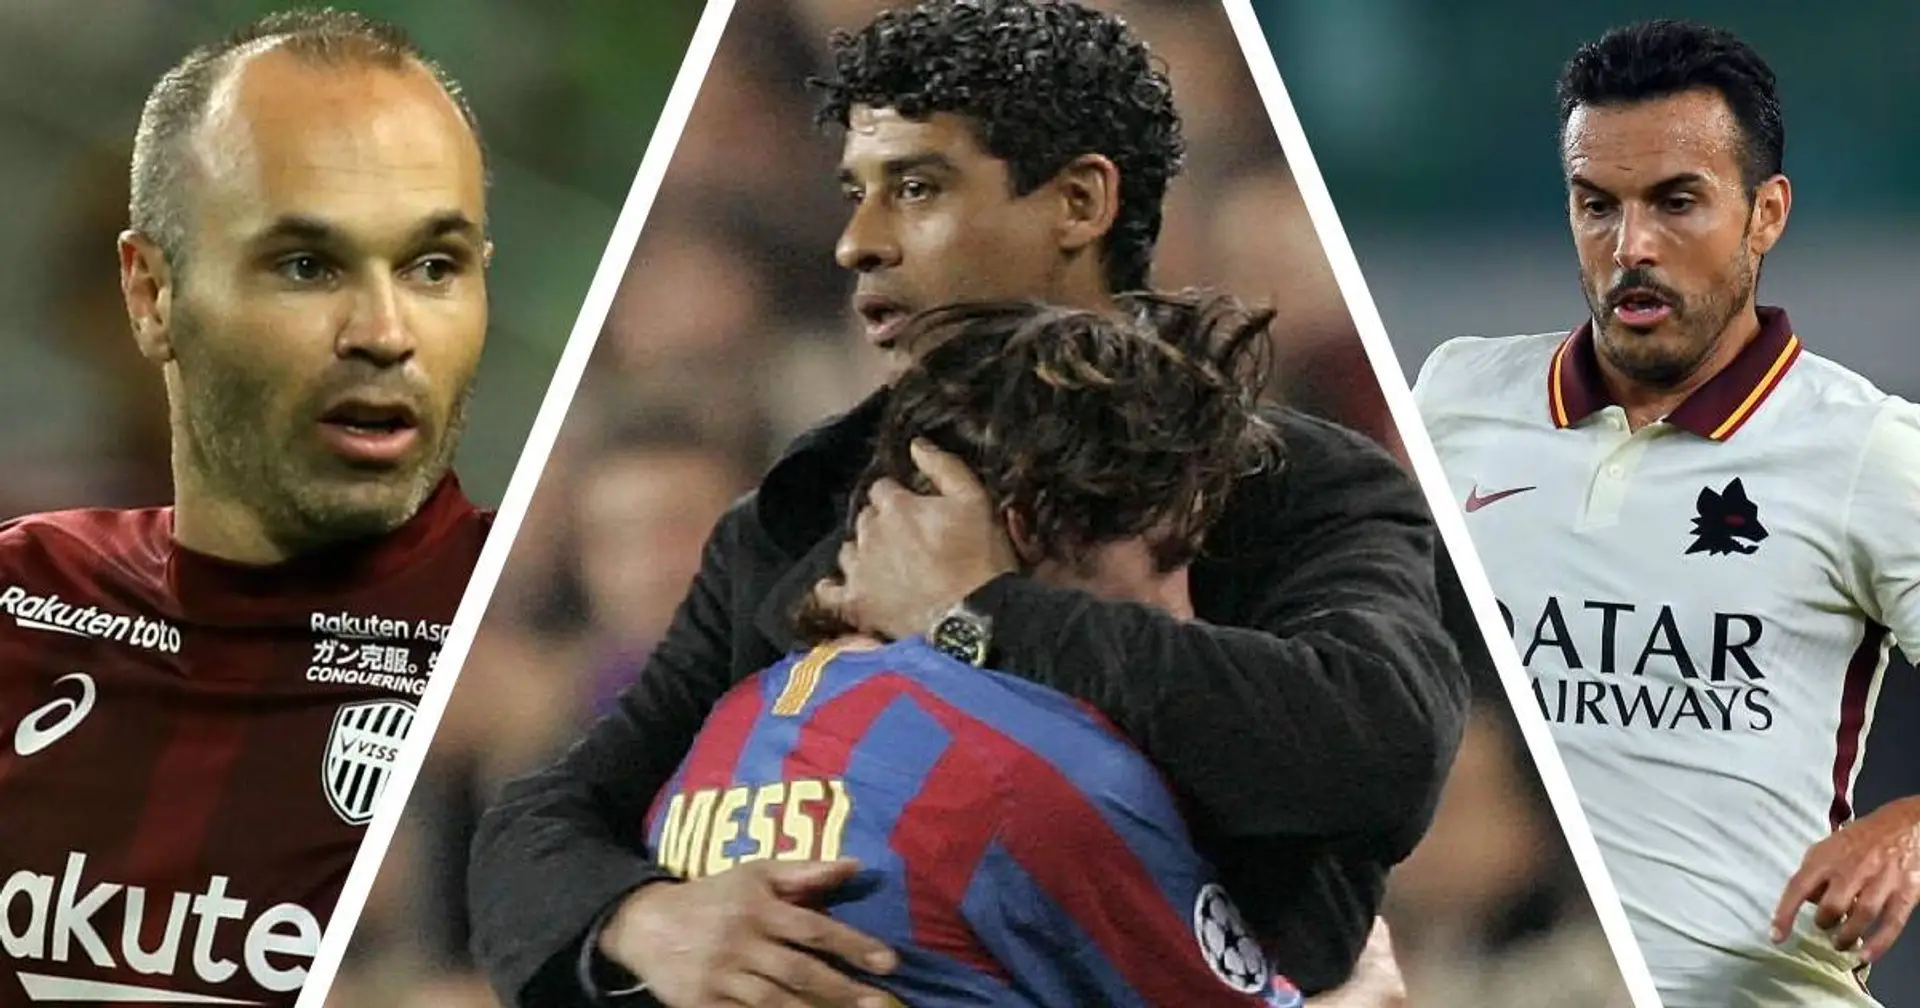 5 players from Frank Rijkaard's last Barca are still playing – here's who and where